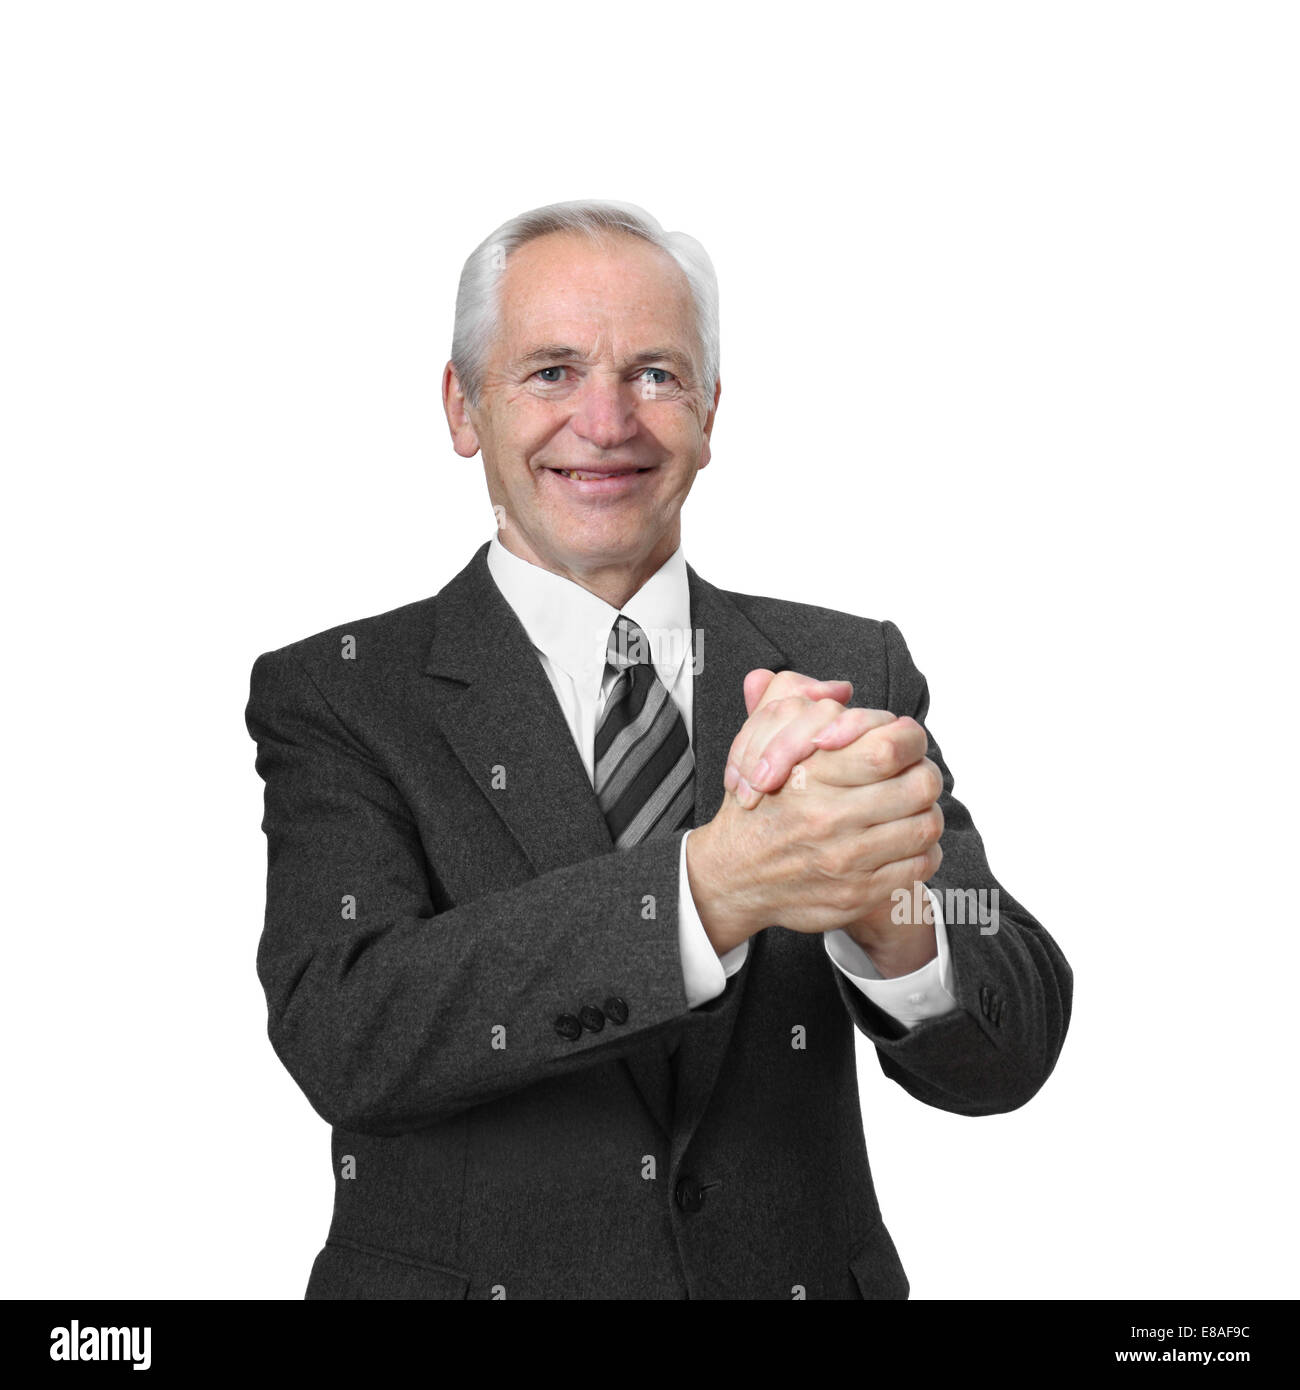 Senior man with smiling face holds his hands clasped in imitation of handshake isolated on white background Stock Photo